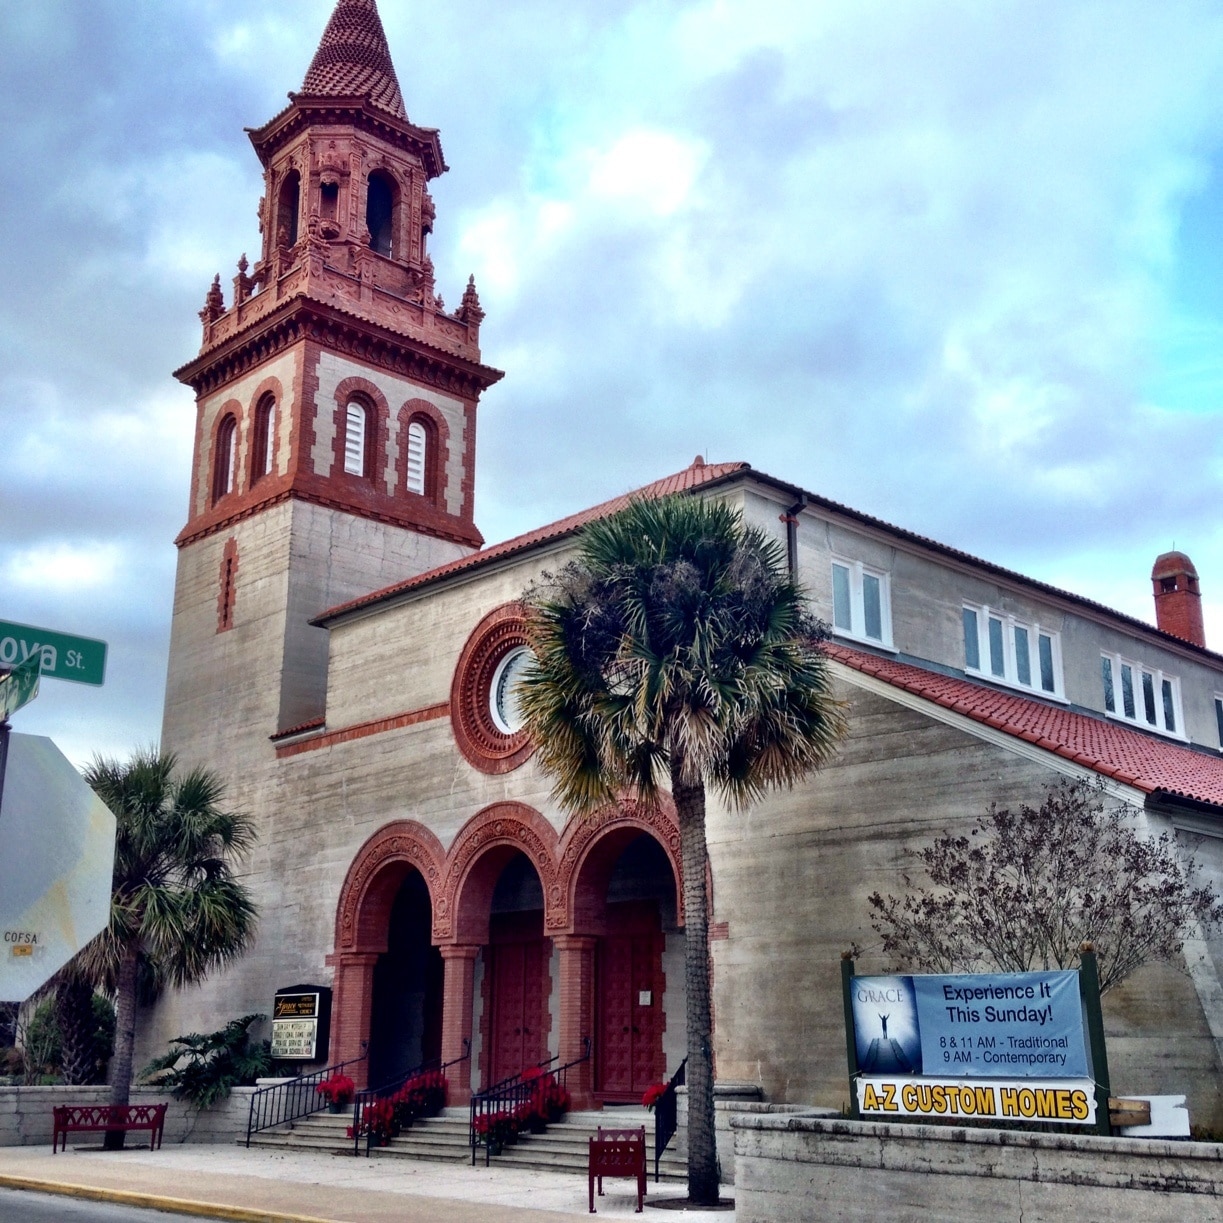 Grace United Methodist Church is a reminder of the tremendous physical impact Henry M. Flagler had on St. Augustine. This complex of structures resulted from a compromise between Flagler and the congregation of Olivet Church. That group of northern Methodists agreed to exchange the land on which their church and parsonage stood for a new complex designed by John M. Carrere and Thomas Hastings. Flagler, in turn, employed the same architects in designing his Alcazar Hotel, which rose on the former Olivet site. Construction began in 1886 and was dedicated in January 1888. The church and parsonage are excellent examples of the Spanish Renaissance Revival Style of architecture, and the decision to execute the design in poured concrete resulted in unusual and aesthetically pleasing structures which have stood the tests of time and the elements. Grace United Methodist Church was entered in the National Register of Historic Places on November 29, 1979. 